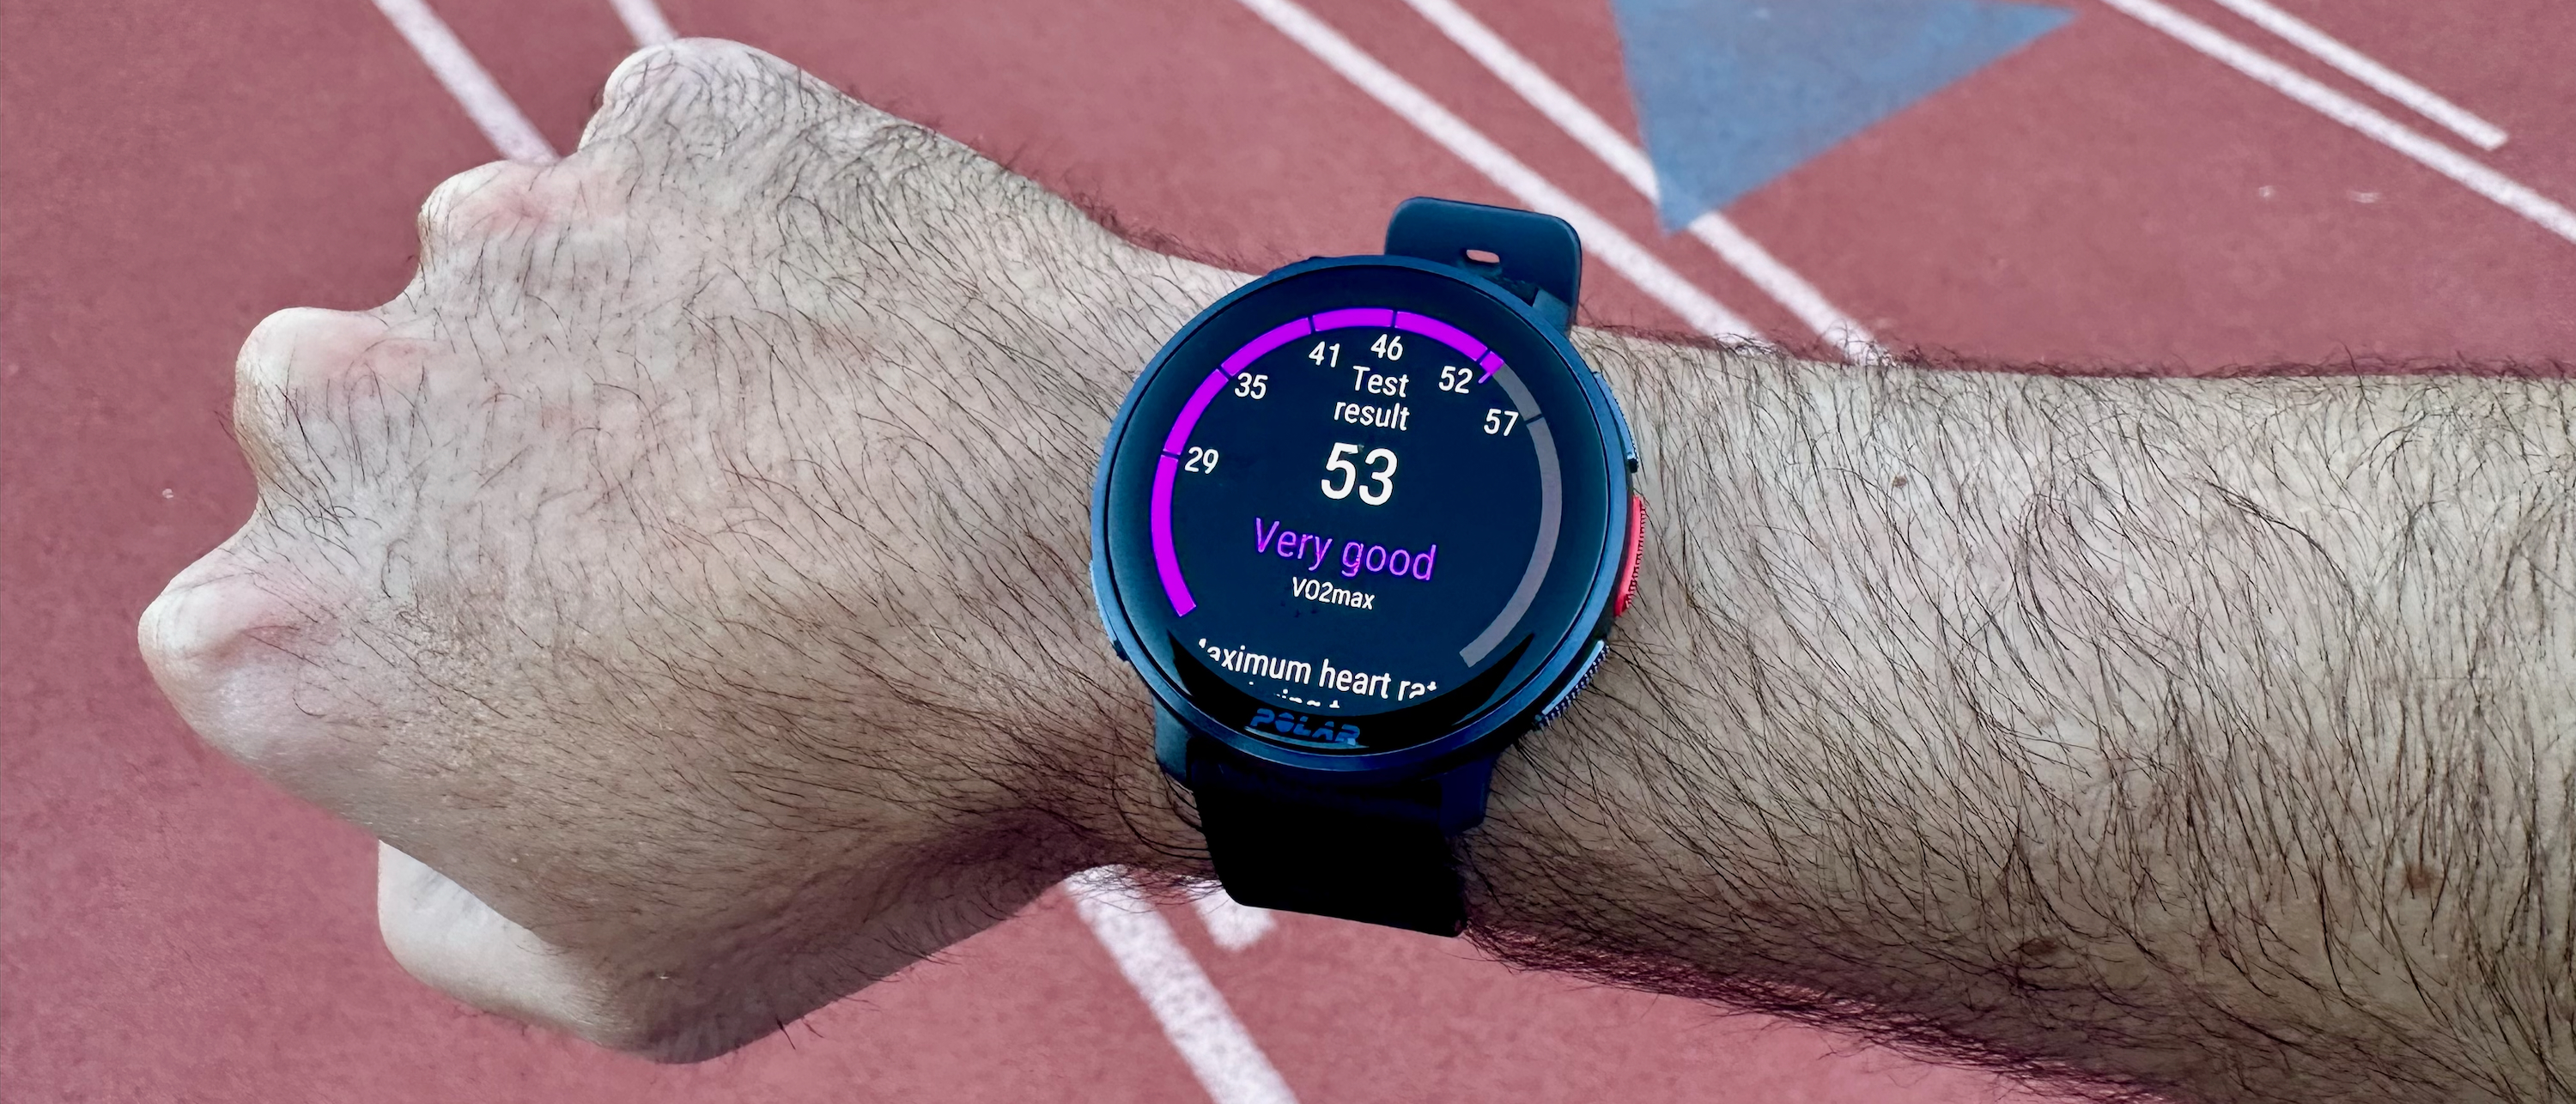 The Polar Vantage V3, which displays the user's VO2 Max score after a Running Fitness test.